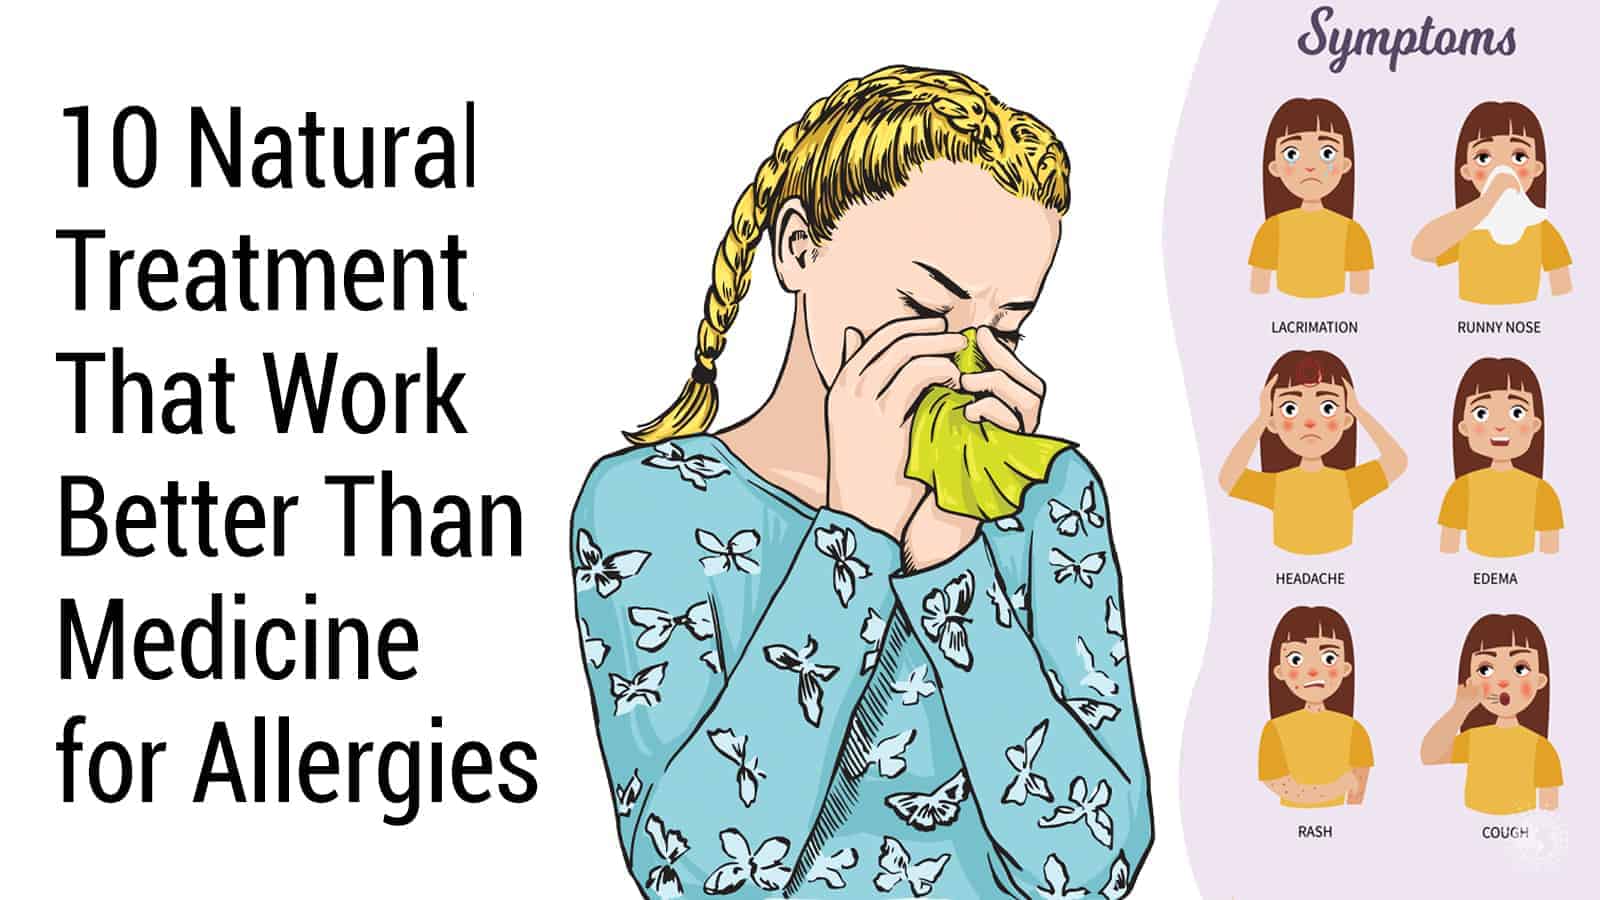 10 Natural Treatments That Work Better Than Medicine for Allergies